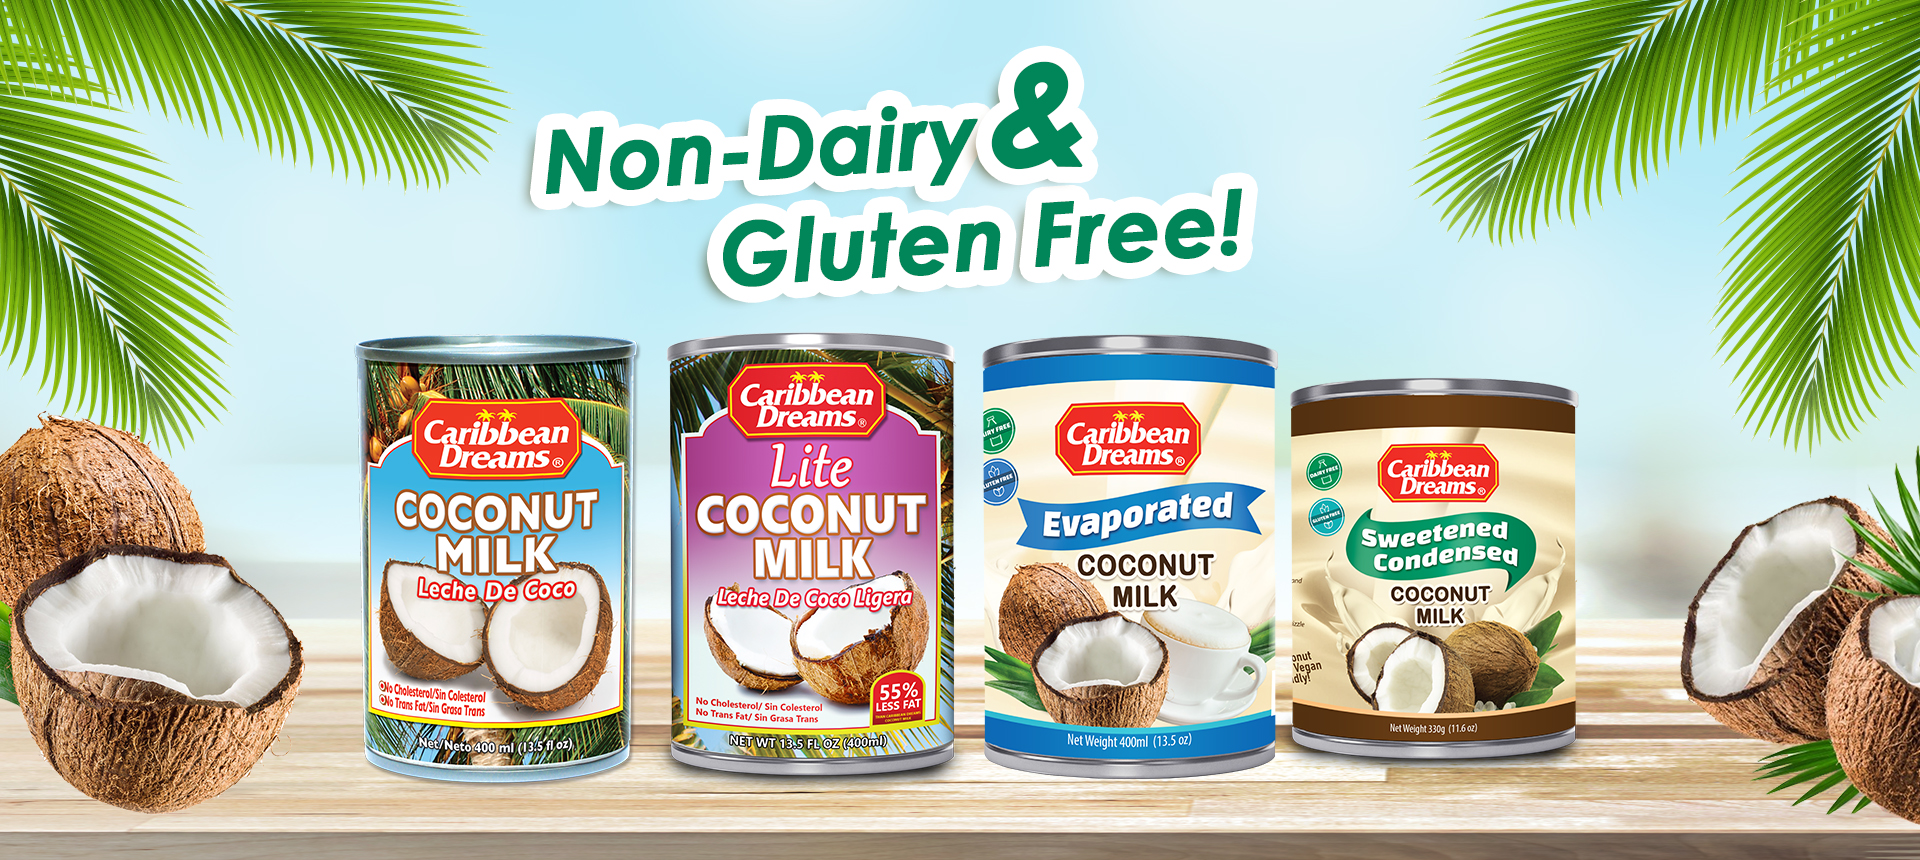 Caribbean Dreams Gluten Free and Dairy Free Coconut based products 